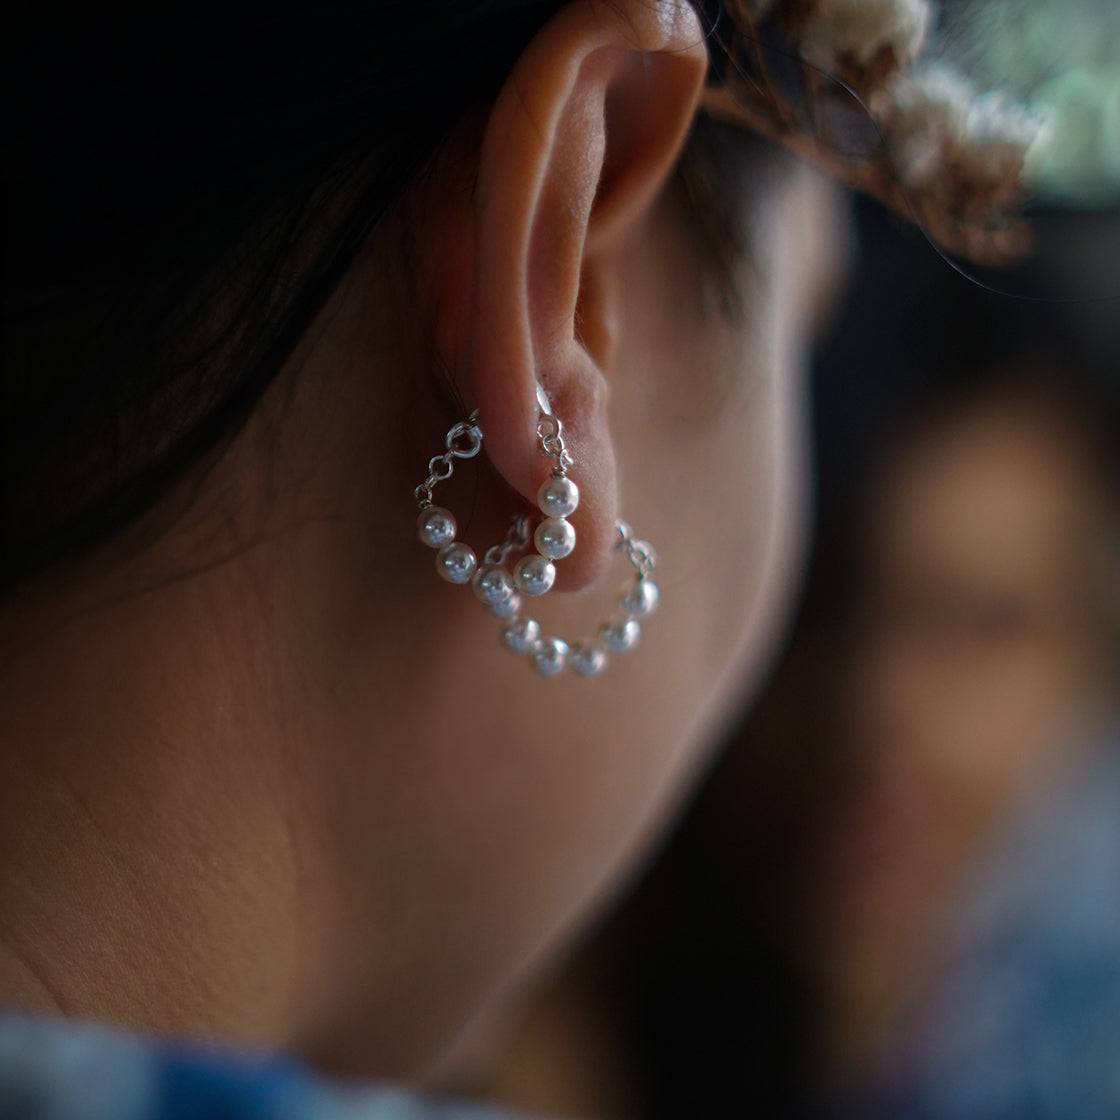 a close up of a woman's ear with pearls